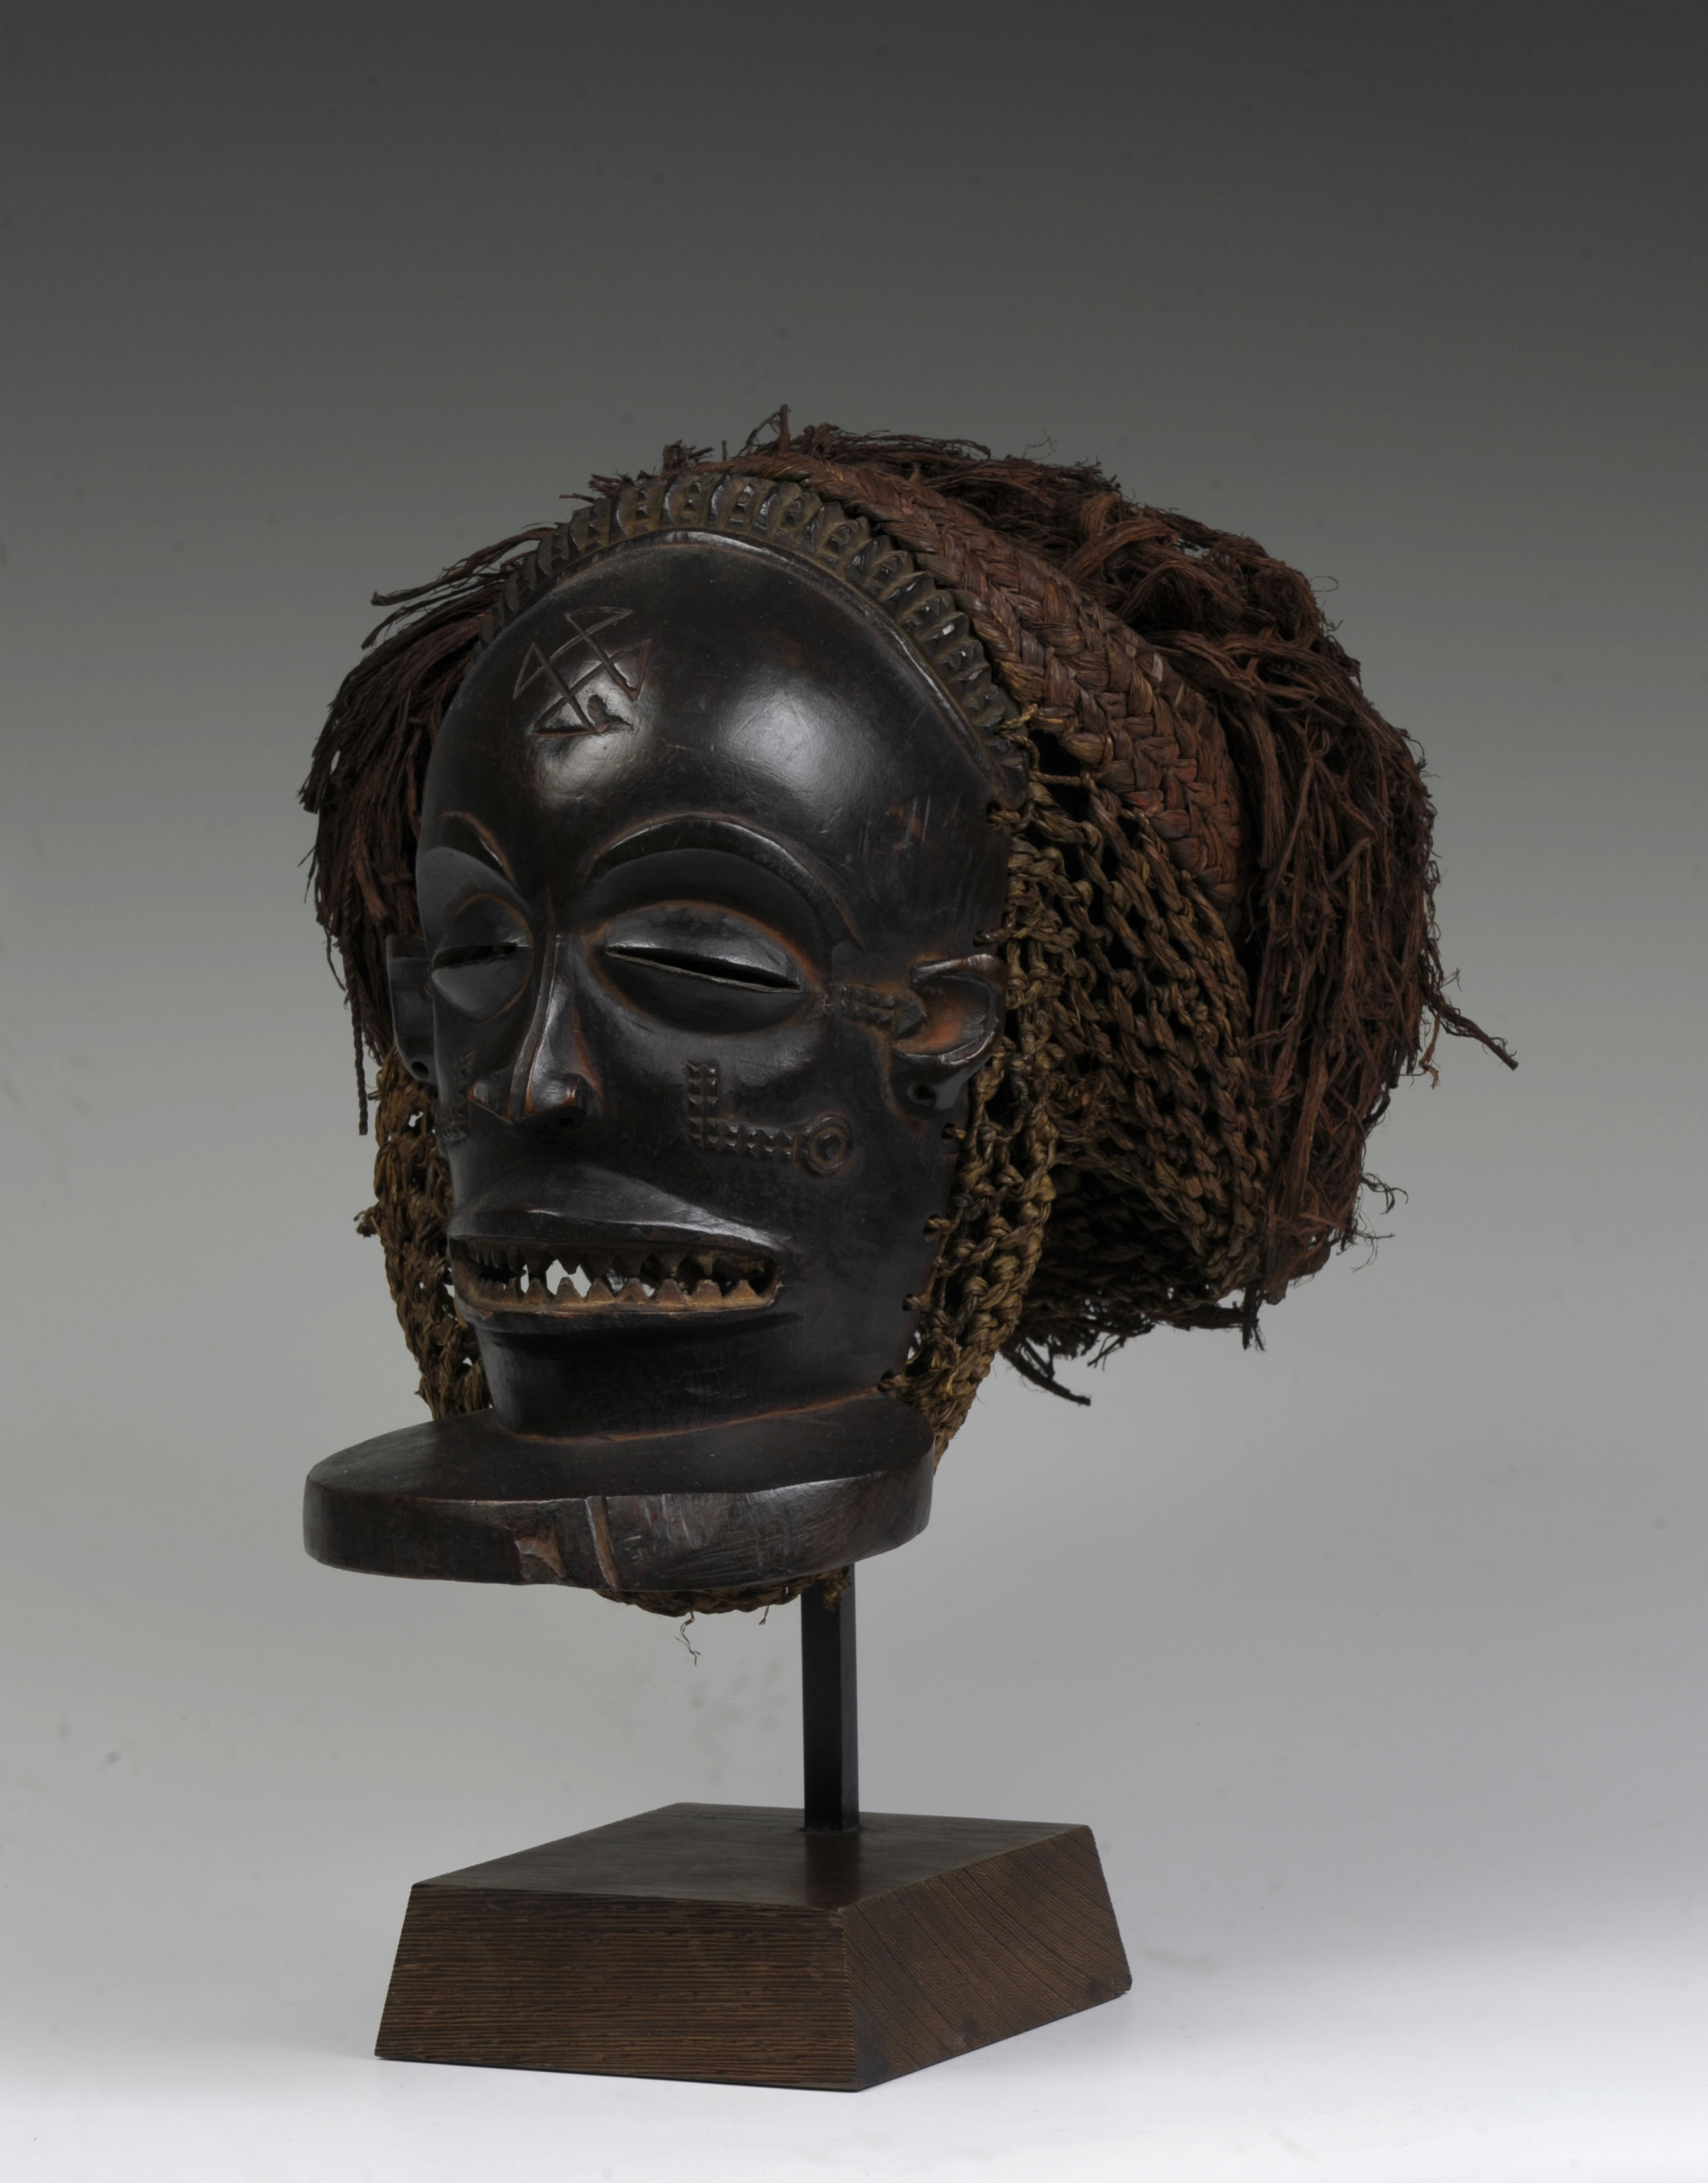 Chihongo (male face mask), Chokwe style. Early to mid-20th century. Wood, cotton, bark, raffia. 11 1/2  x 9  x 10 3/4 in. University of Iowa Stanley Museum of Art, The Stanley Collection of African Art, X1990.598